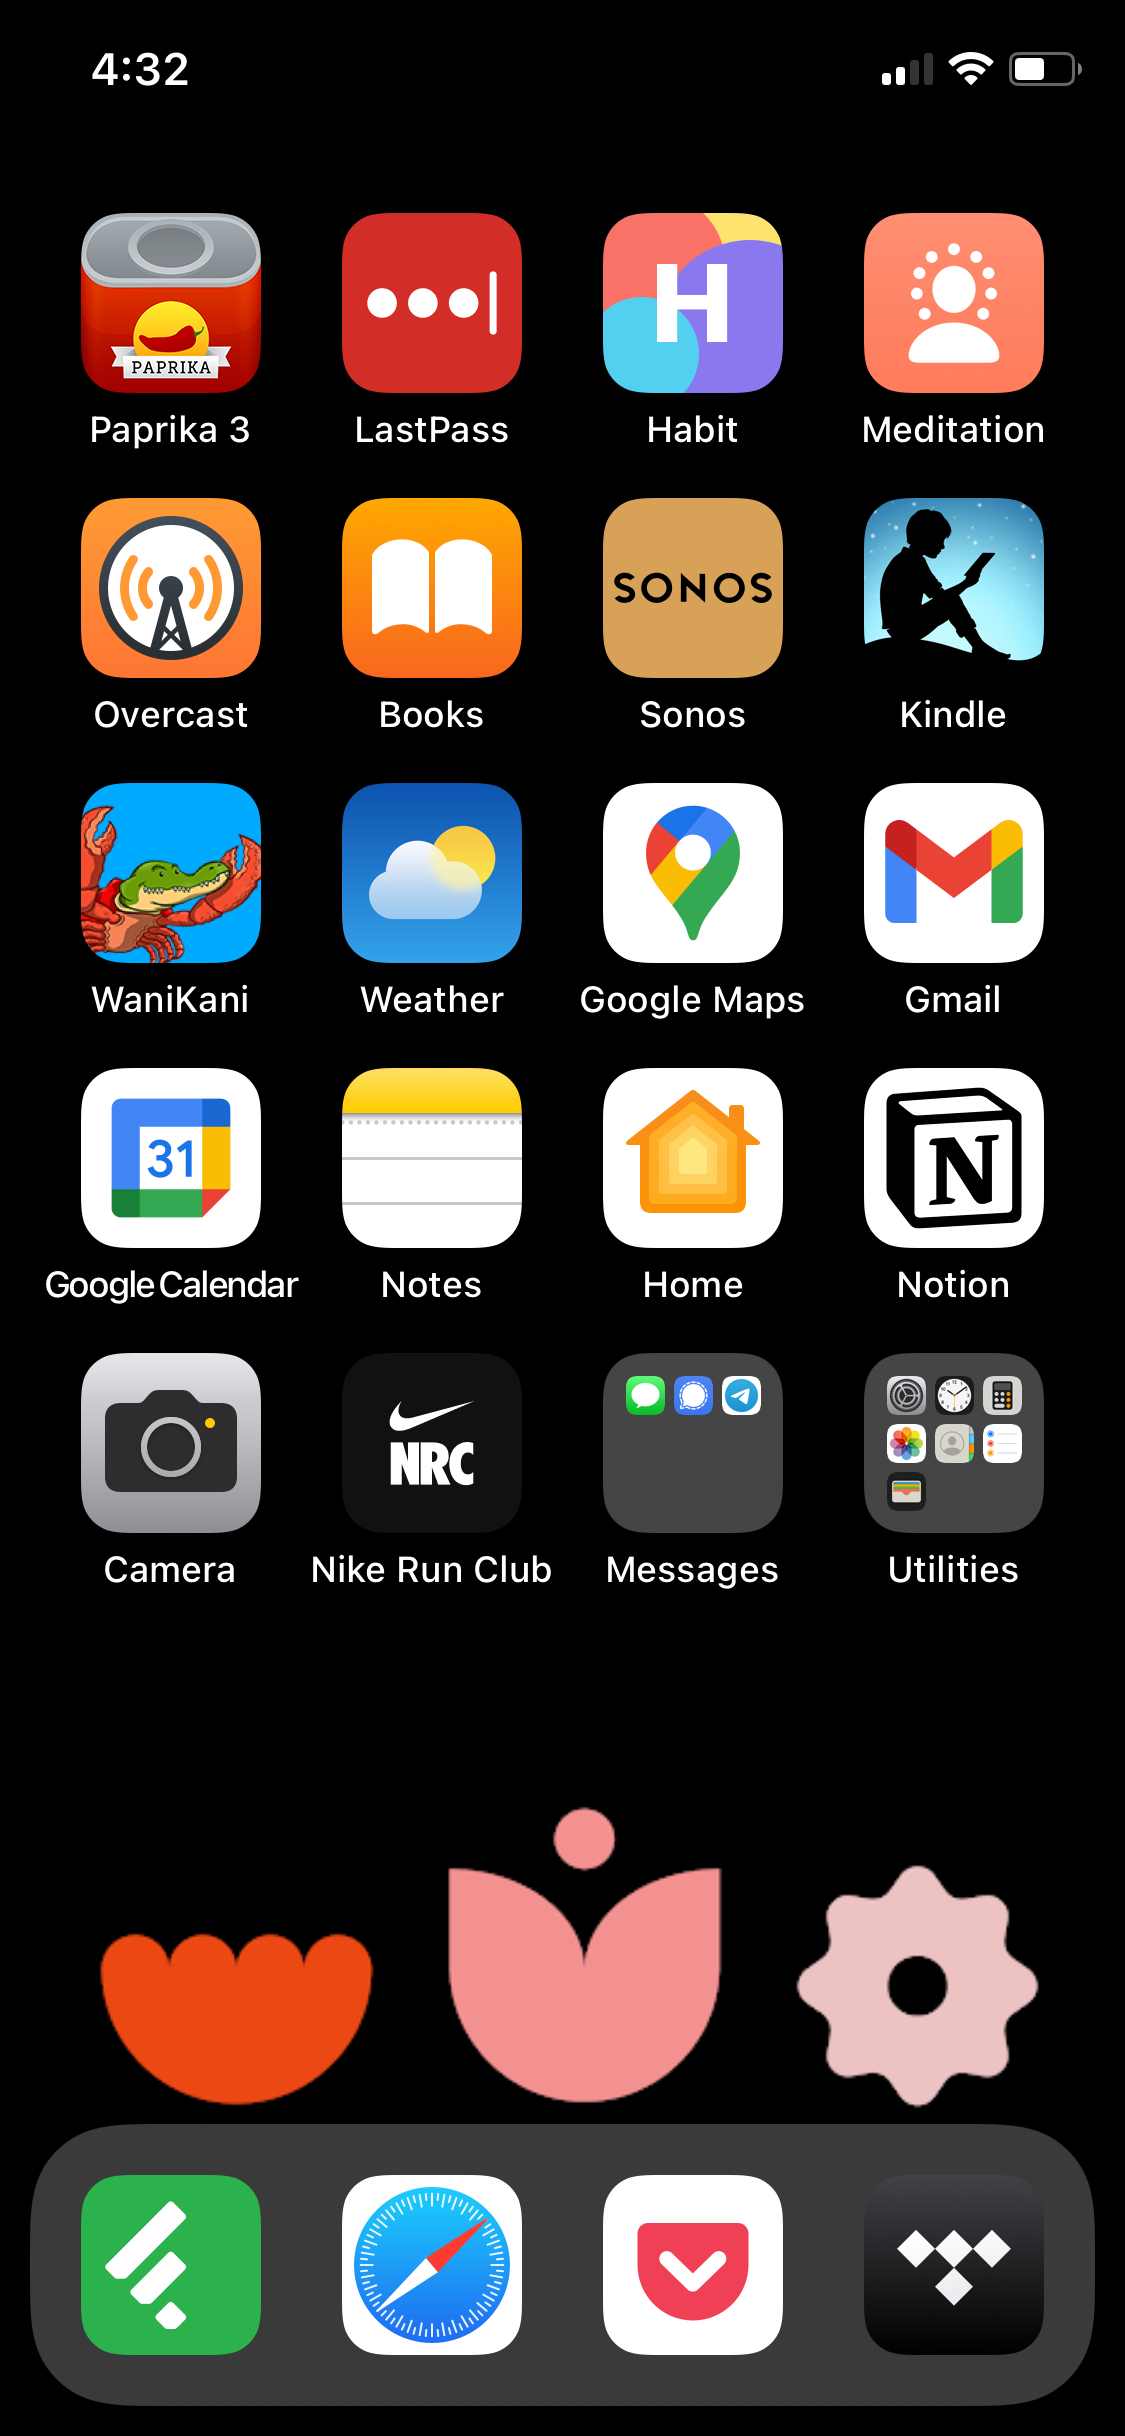 A home screen showing the three geometric flowers at the bottom of the screen this time, arranged in a row such that they avoid being overlapped by any app icons